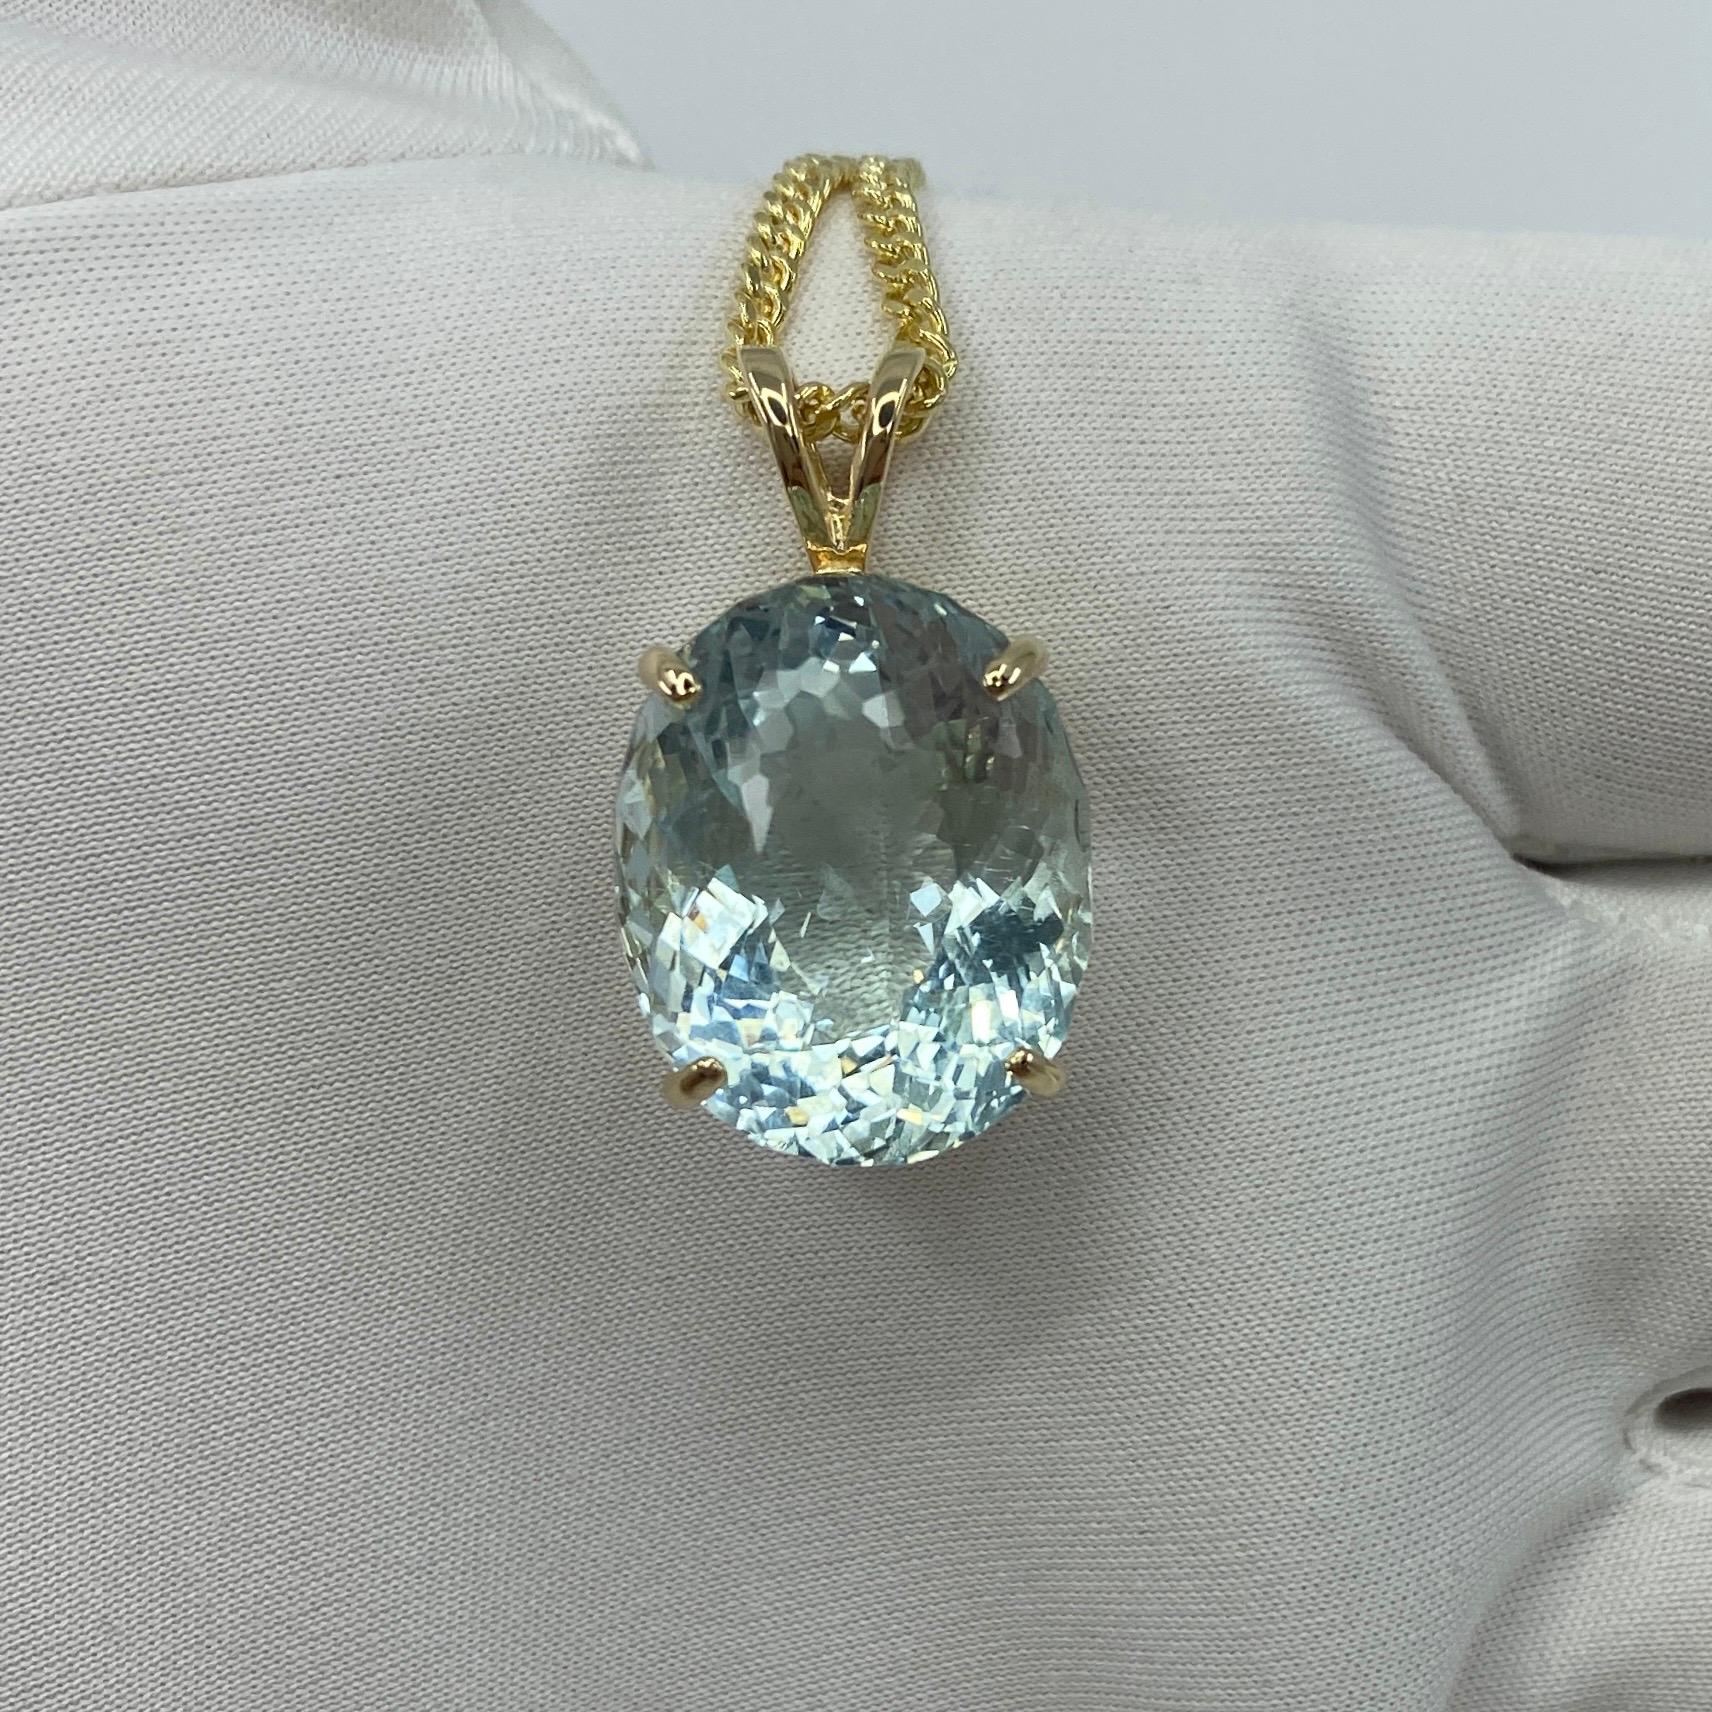 Large Fine Natural Blue Aquamarine Pendant Necklace.

16.94 Carat Aquamarine with a stunning bright blue colour and excellent clarity, set in a fine 14k yellow gold solitaire pendant.
The aquamarine also has an excellent fancy oval cut showing lots